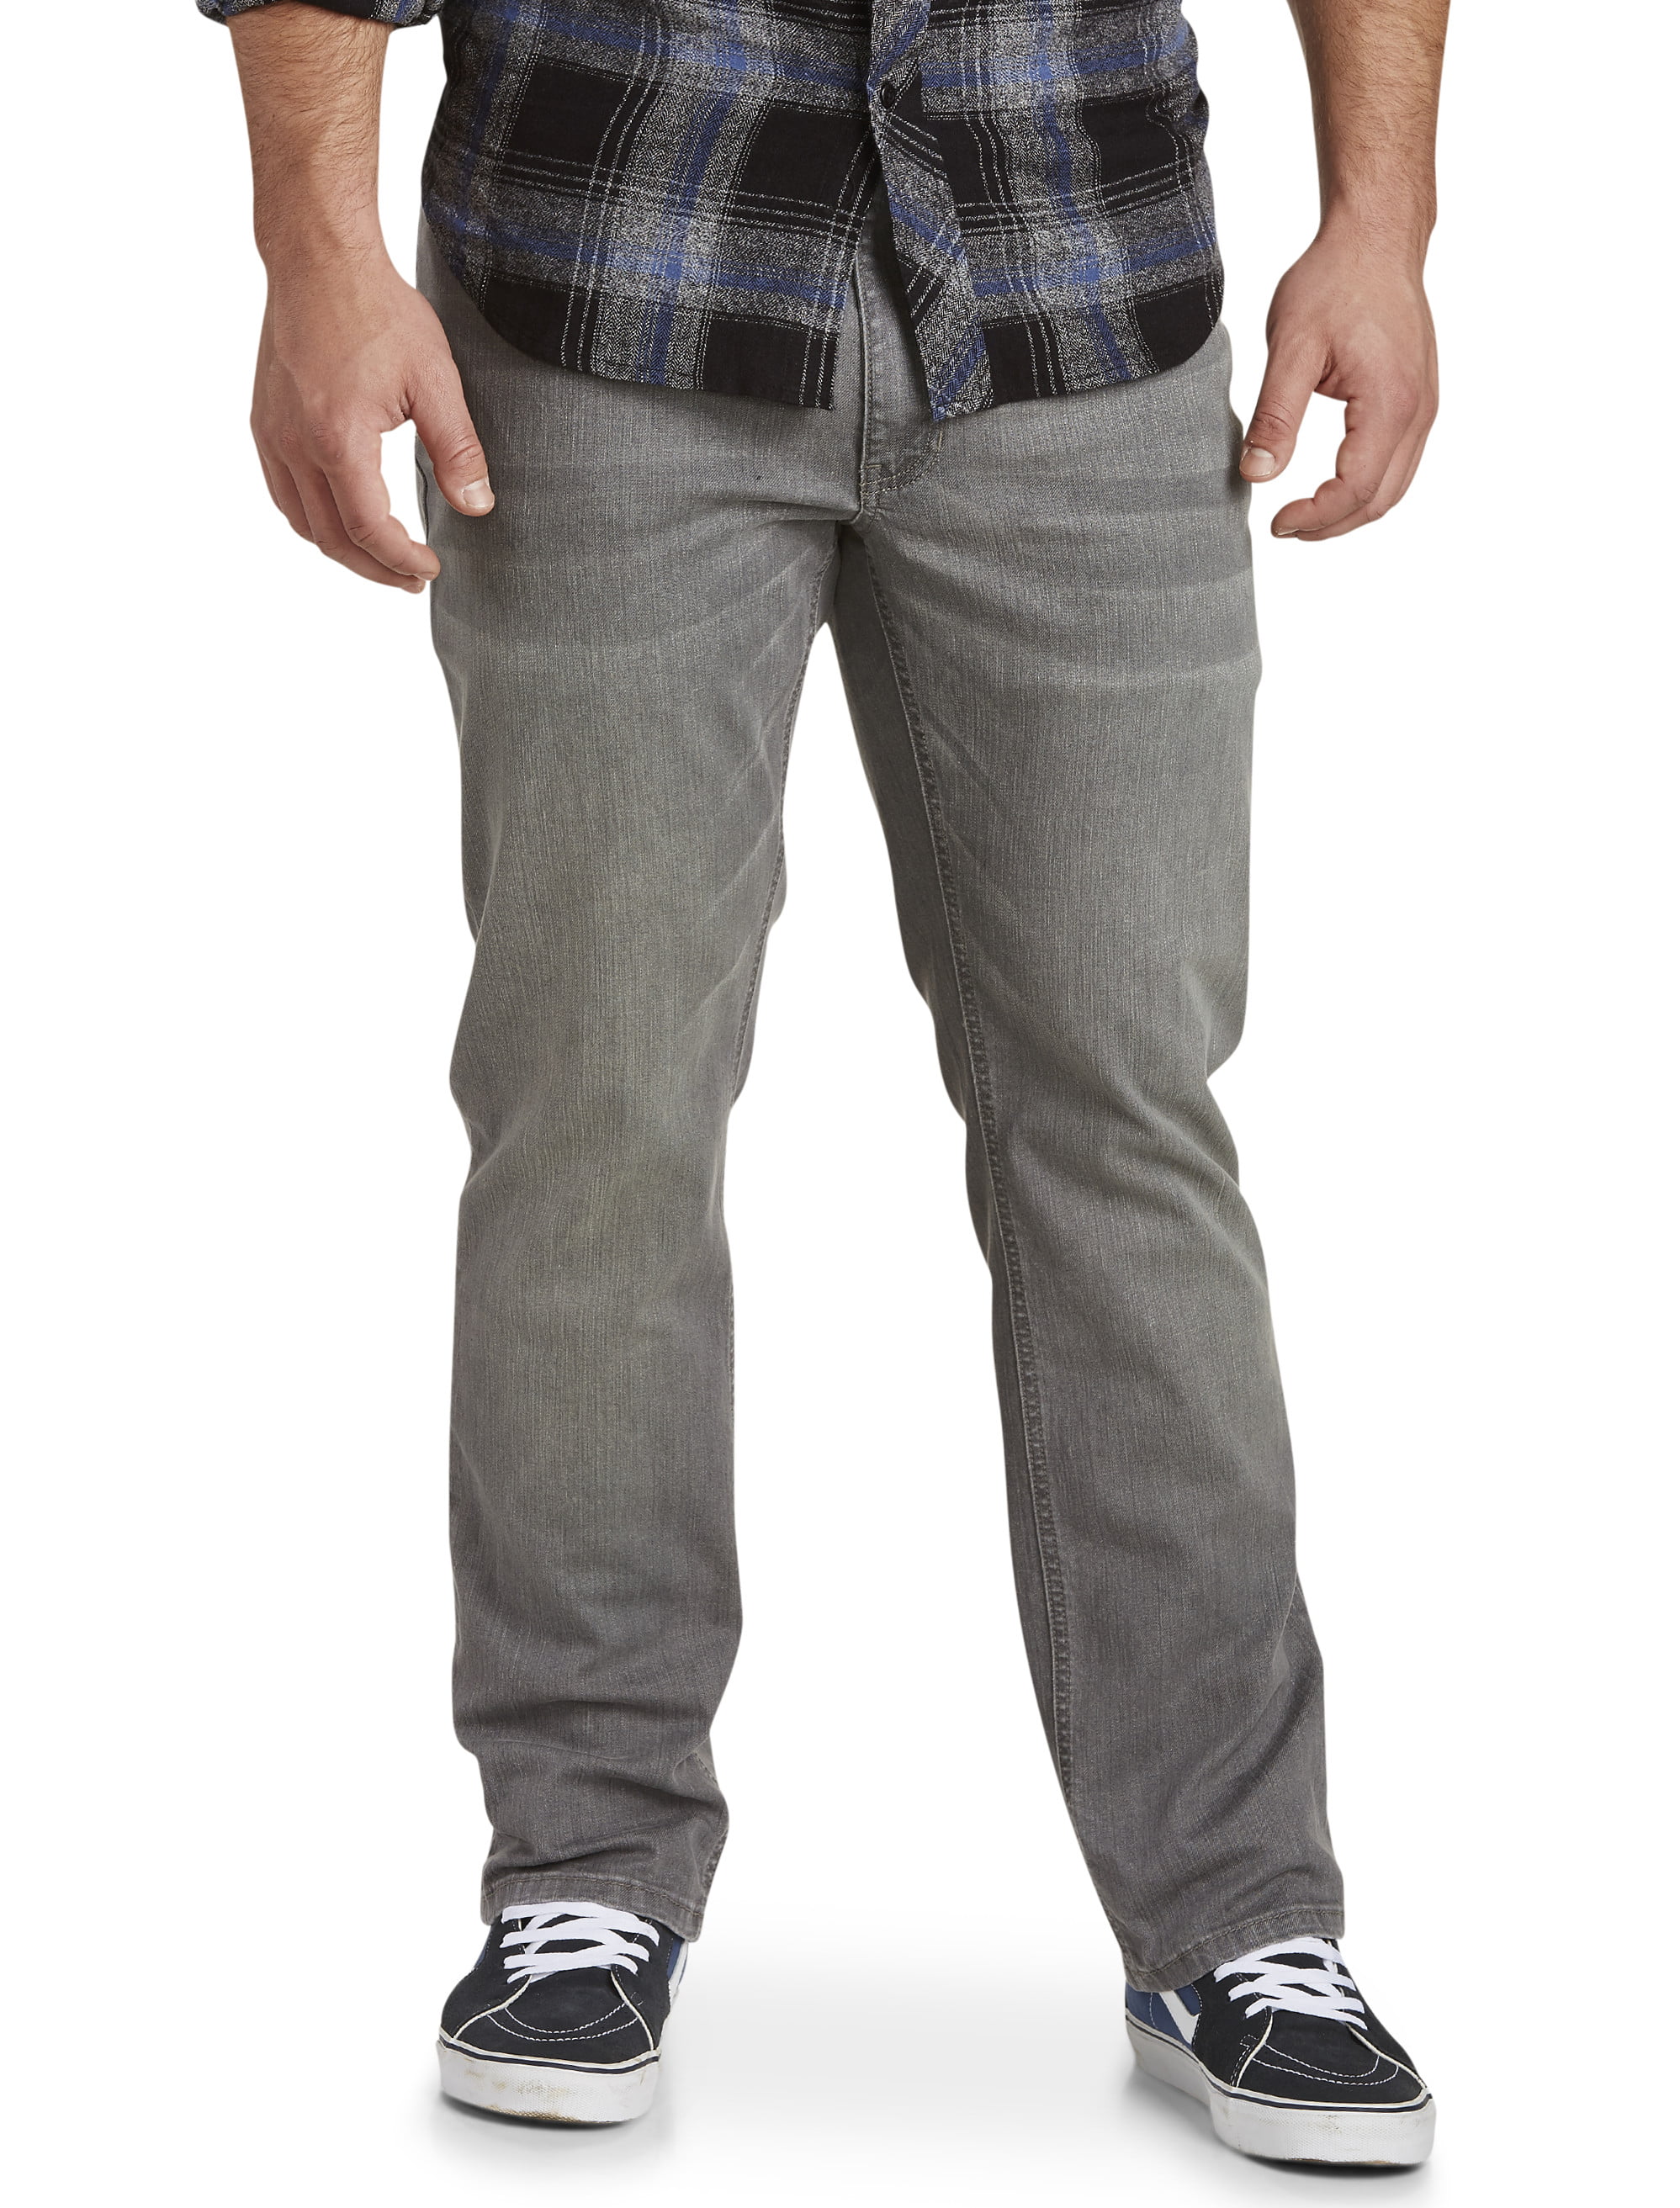 true nation athletic fit jeans